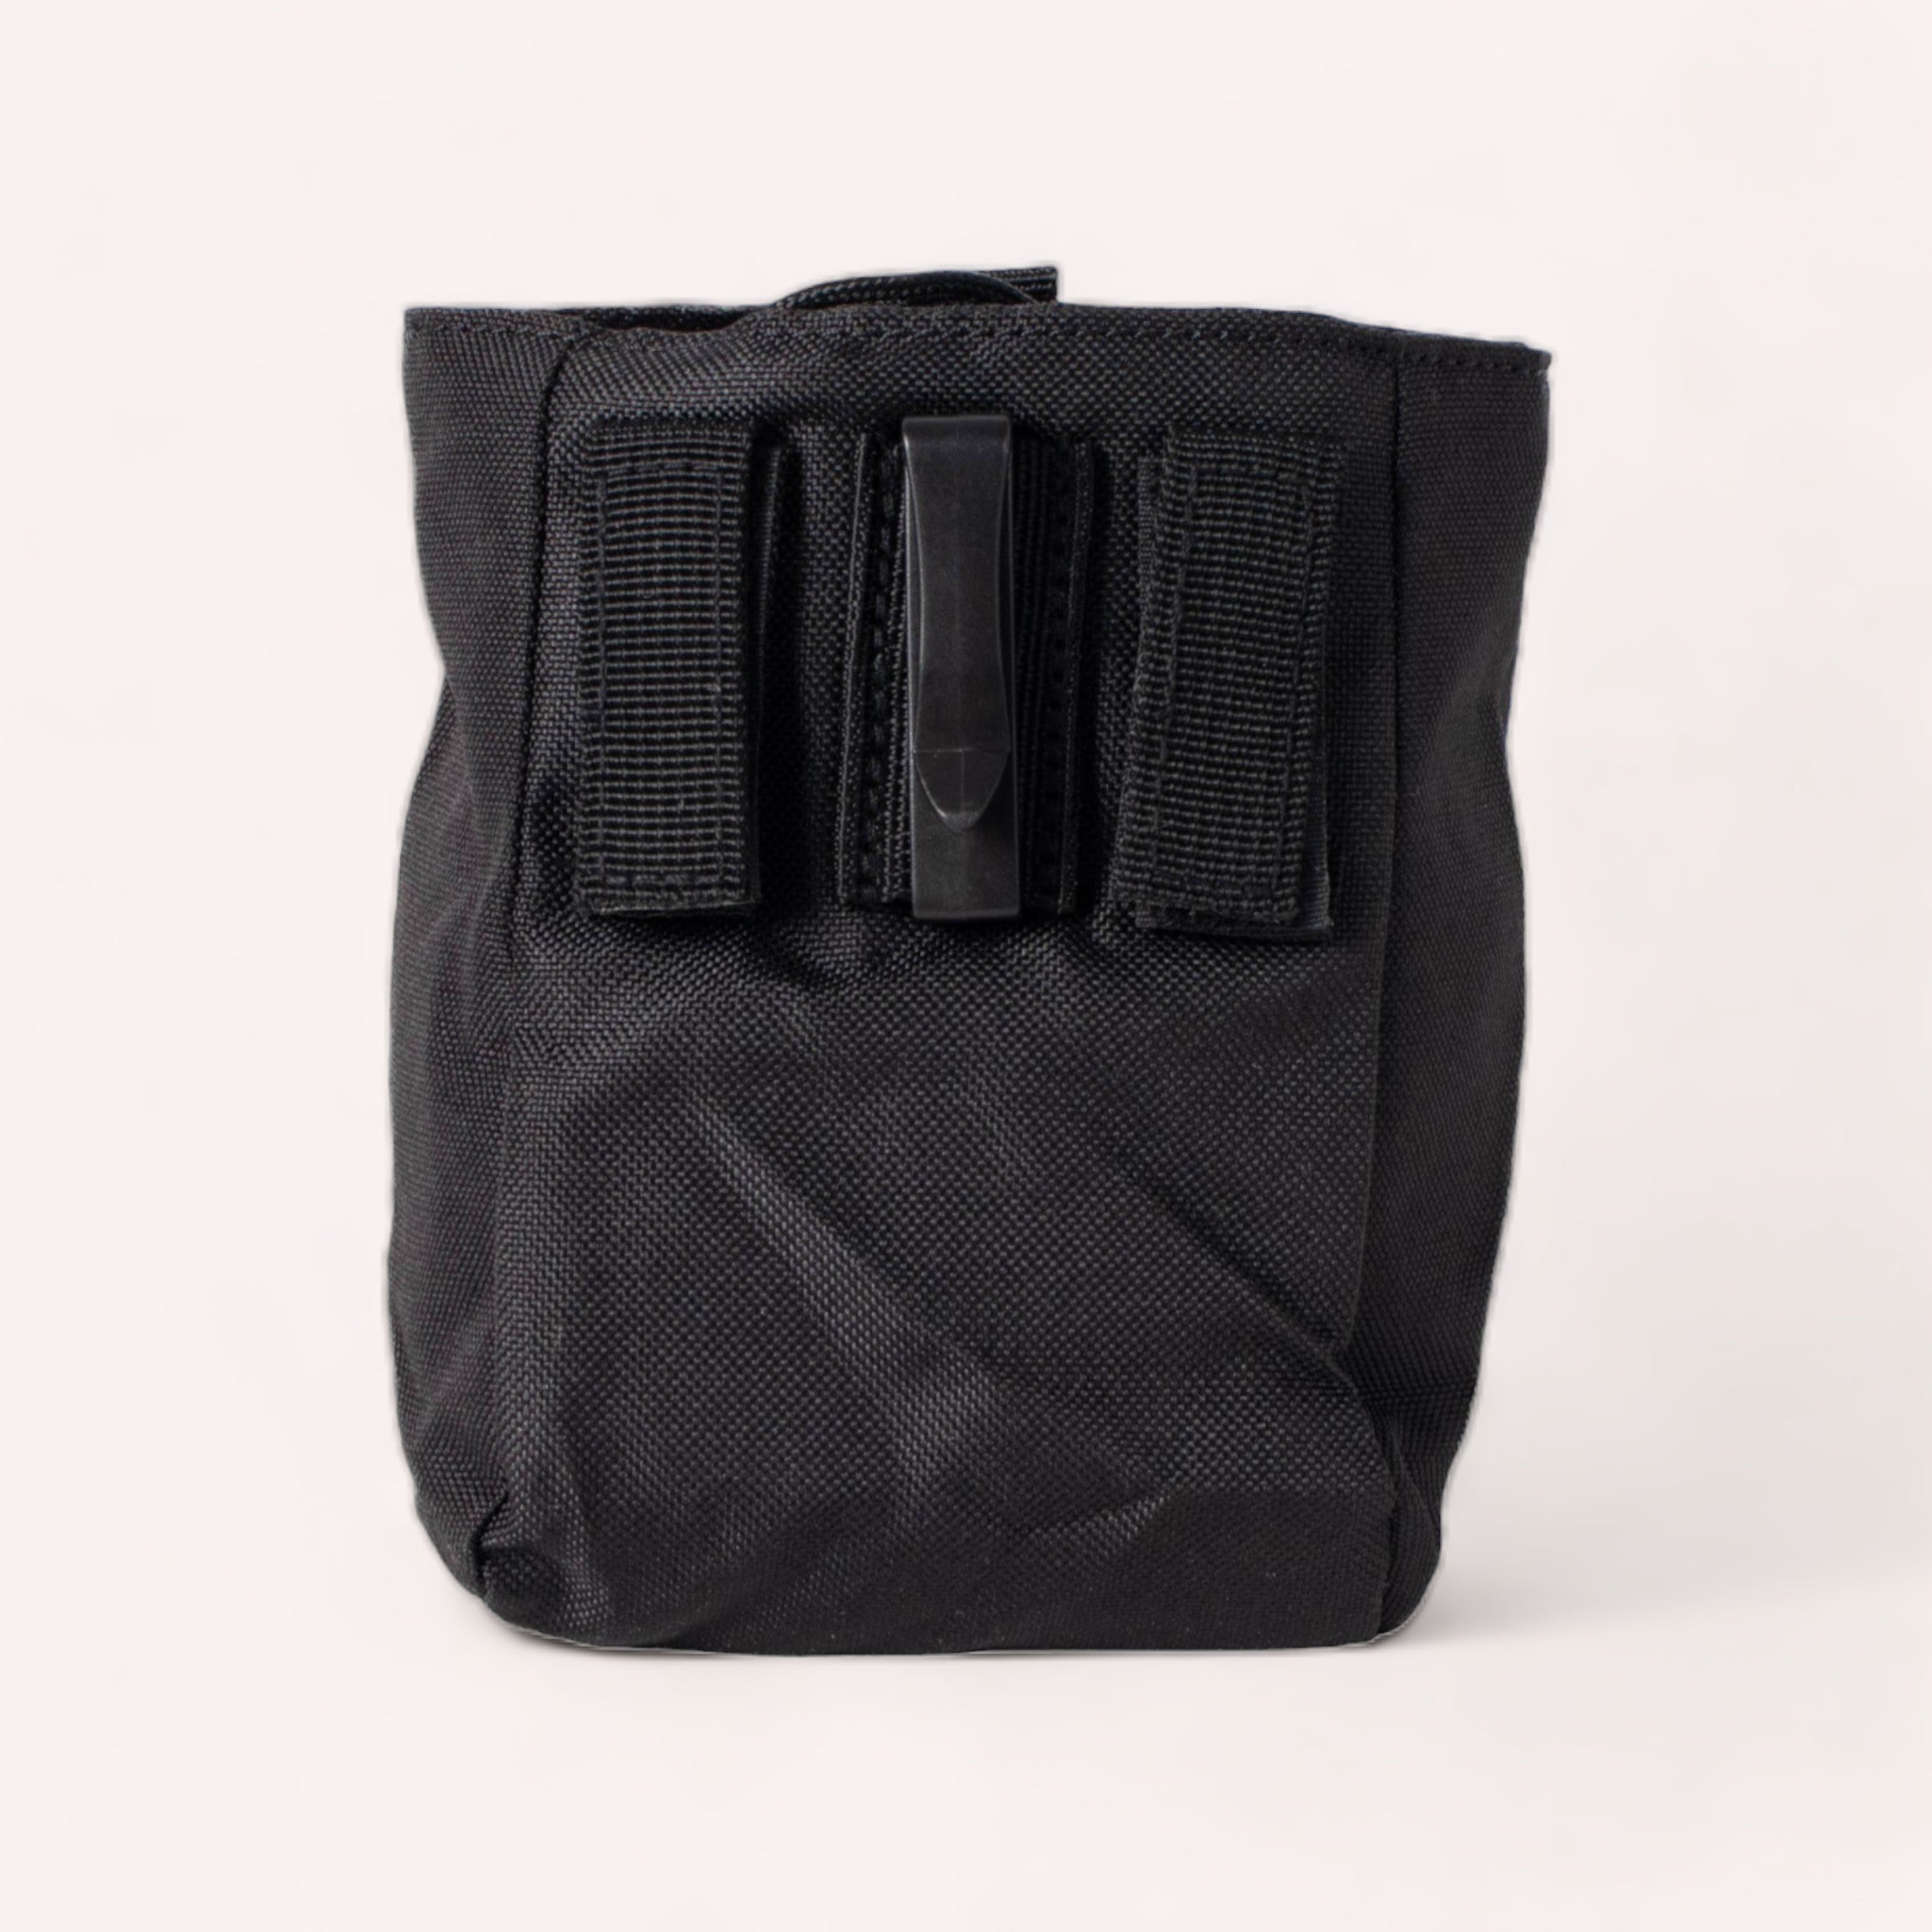 A Black Treat Pouch by Wolves of Wellington with a textured surface and a velcro flap closure on a white background, ideal for positive reinforcement training.